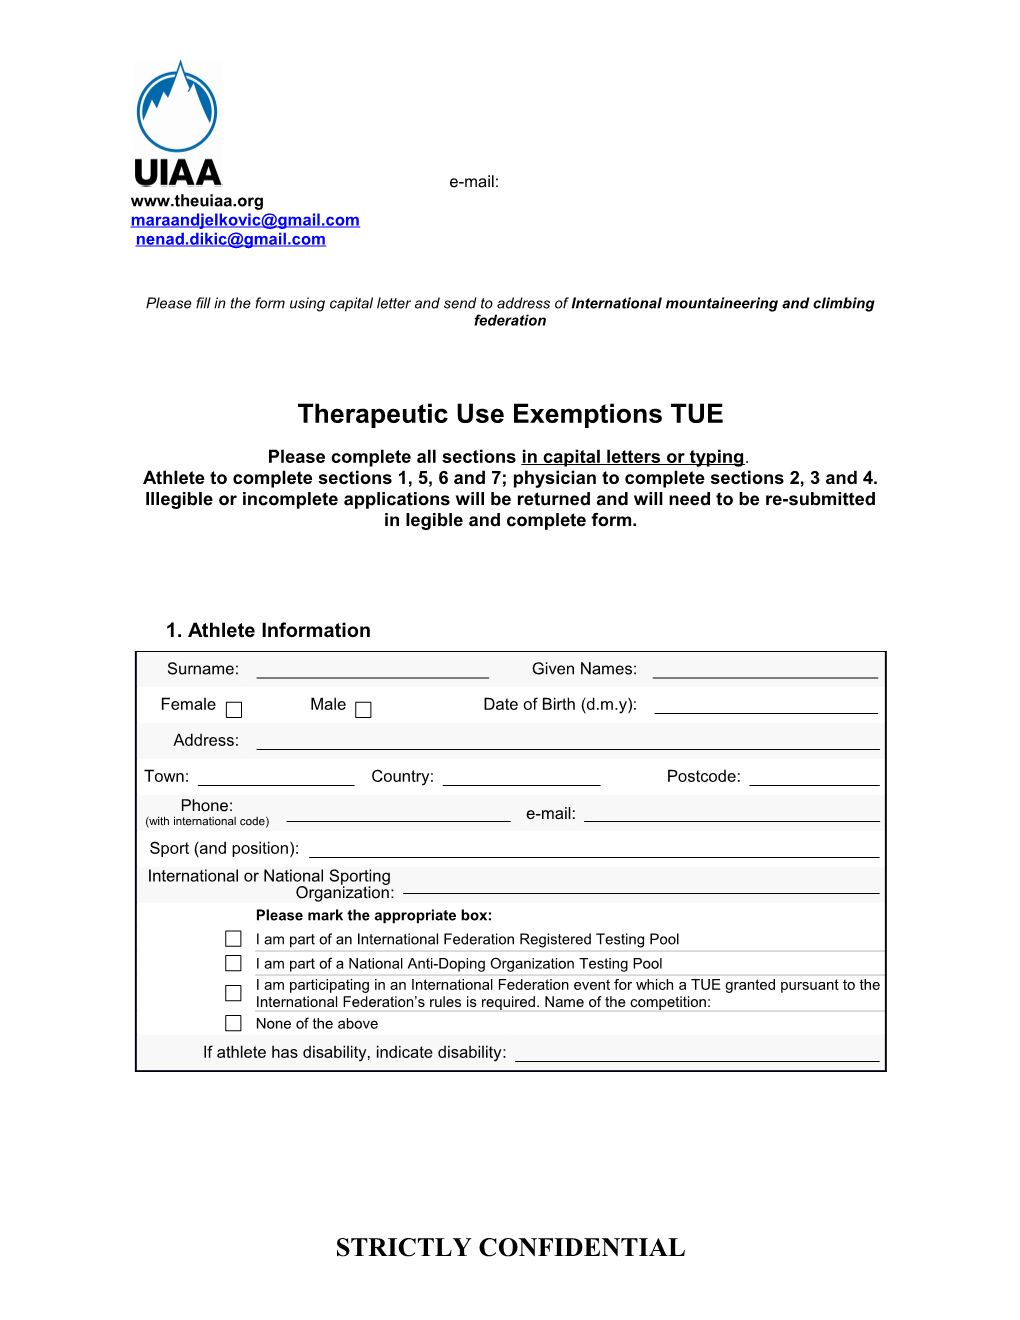 Therapeutic Use Exemptionstue